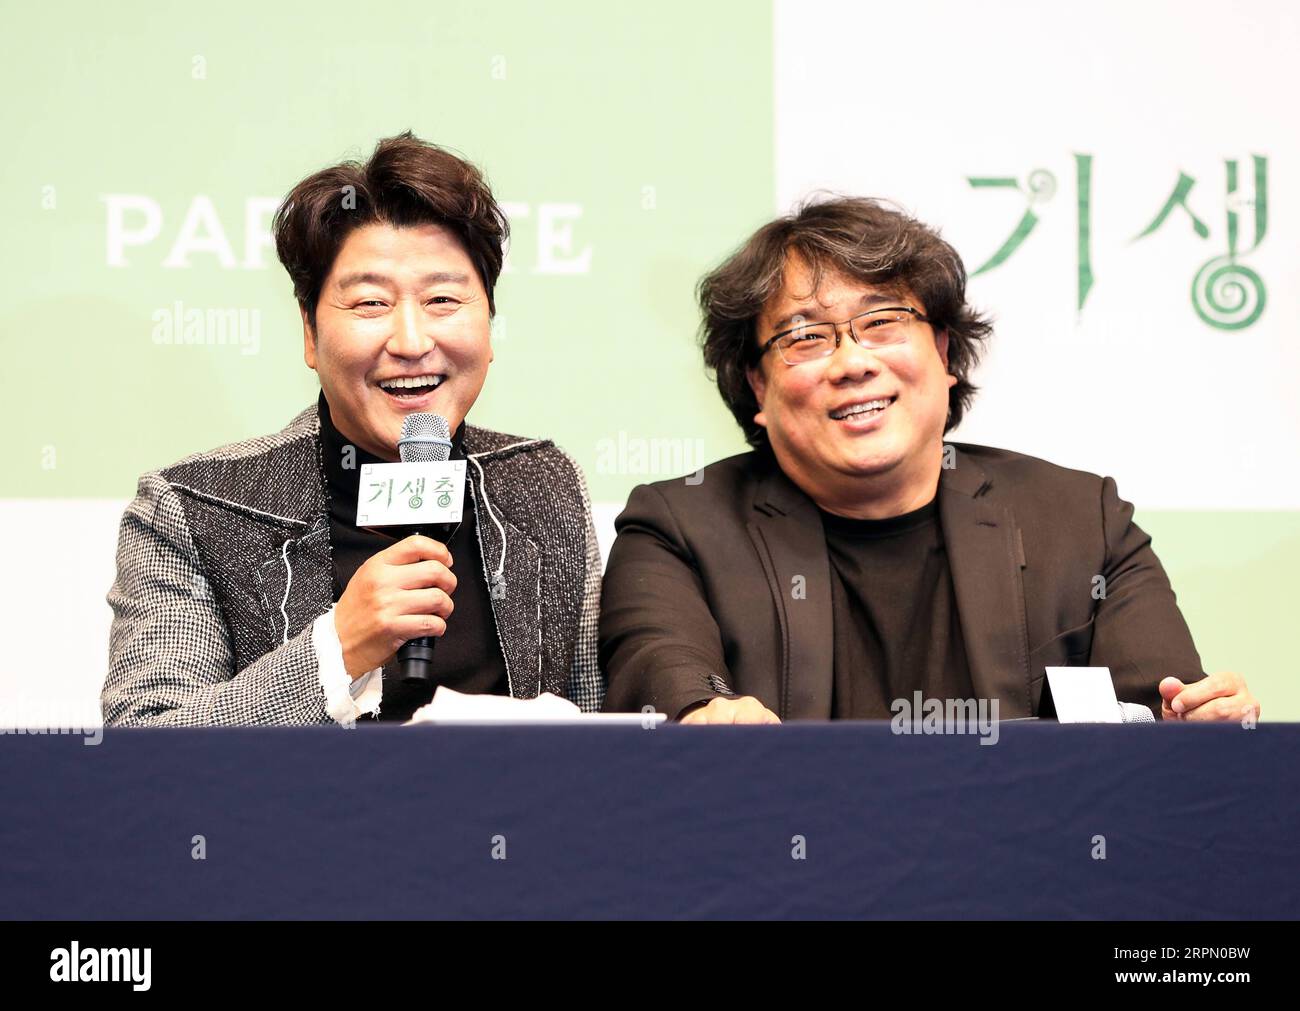 200219 -- SEOUL, Feb. 19, 2020 -- Song Kang-ho, a leading actor of South Korean film Parasite , speaks beside director Bong Joon-ho at a press conference in Seoul, South Korea, Feb. 19, 2020. Parasite , a South Korean black comedy, became the first non-English language film to win the Oscar for best picture, and also nabbed awards for best original screenplay, best international feature film and best director for Bong Joon-ho at the 92nd Academy Awards on Feb. 9, 2020.  SOUTH KOREA-SEOUL-PARASITE-CREATIVE TEAM-PRESS CONFERENCE WangxJingqiang PUBLICATIONxNOTxINxCHN Stock Photo